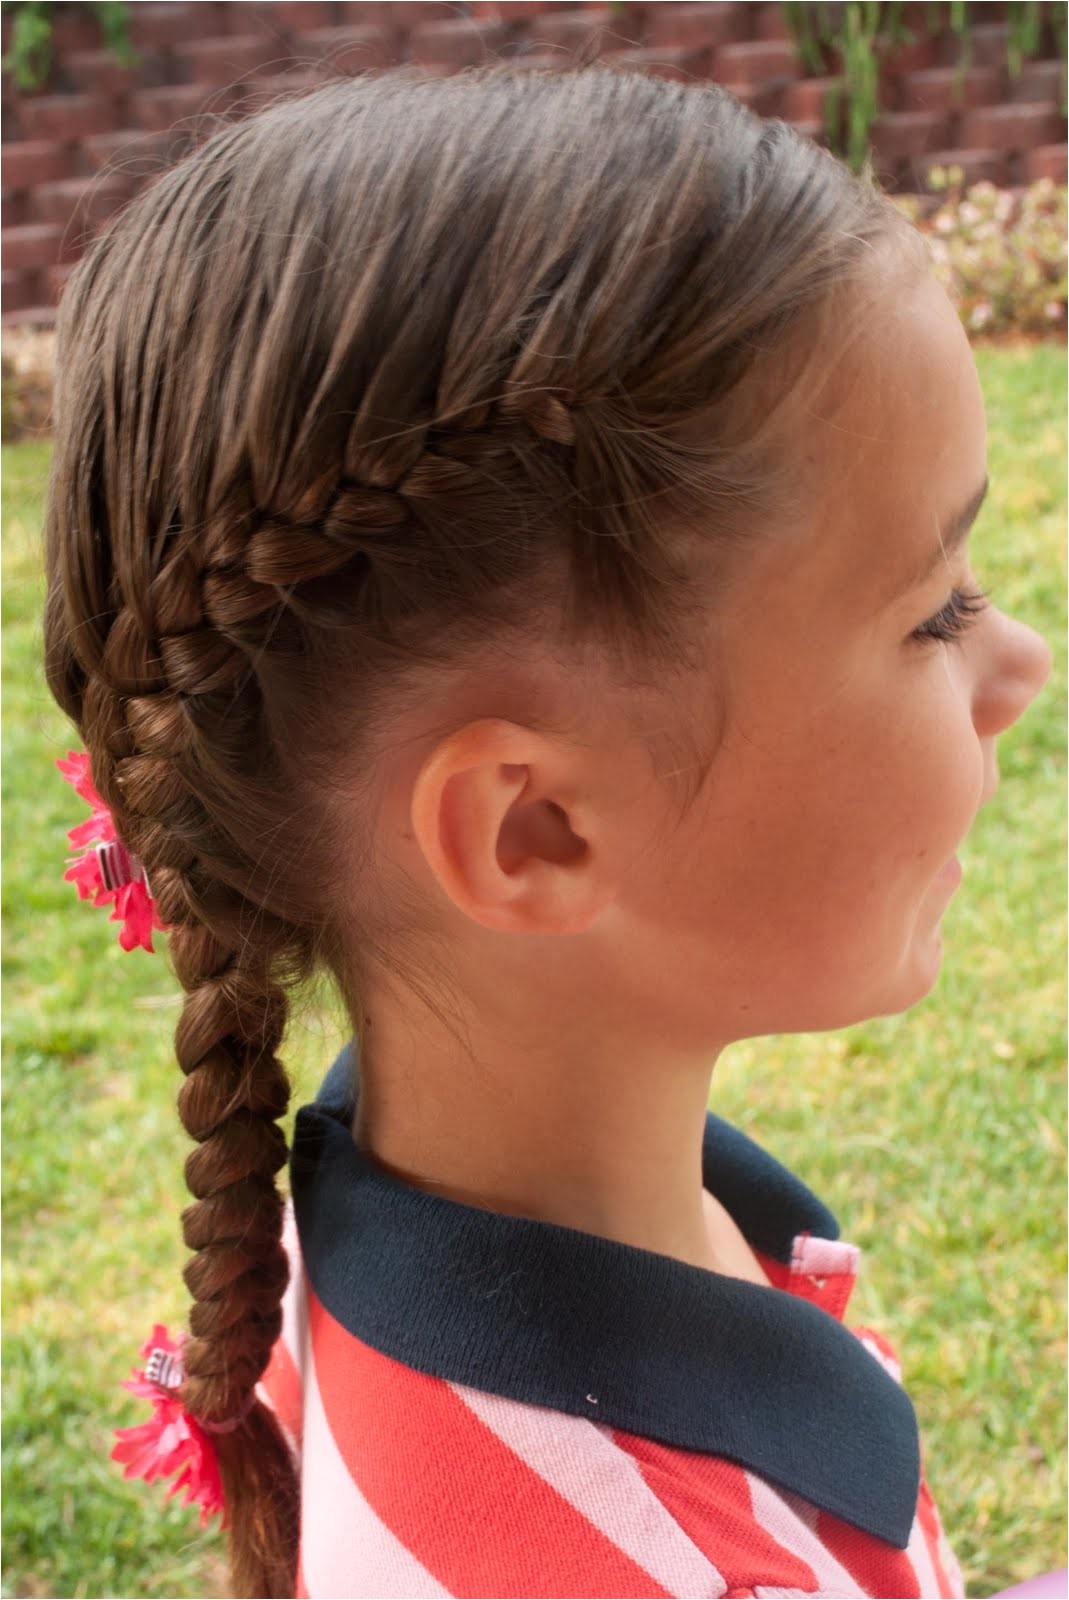 20 hairstyles for kids with pictures